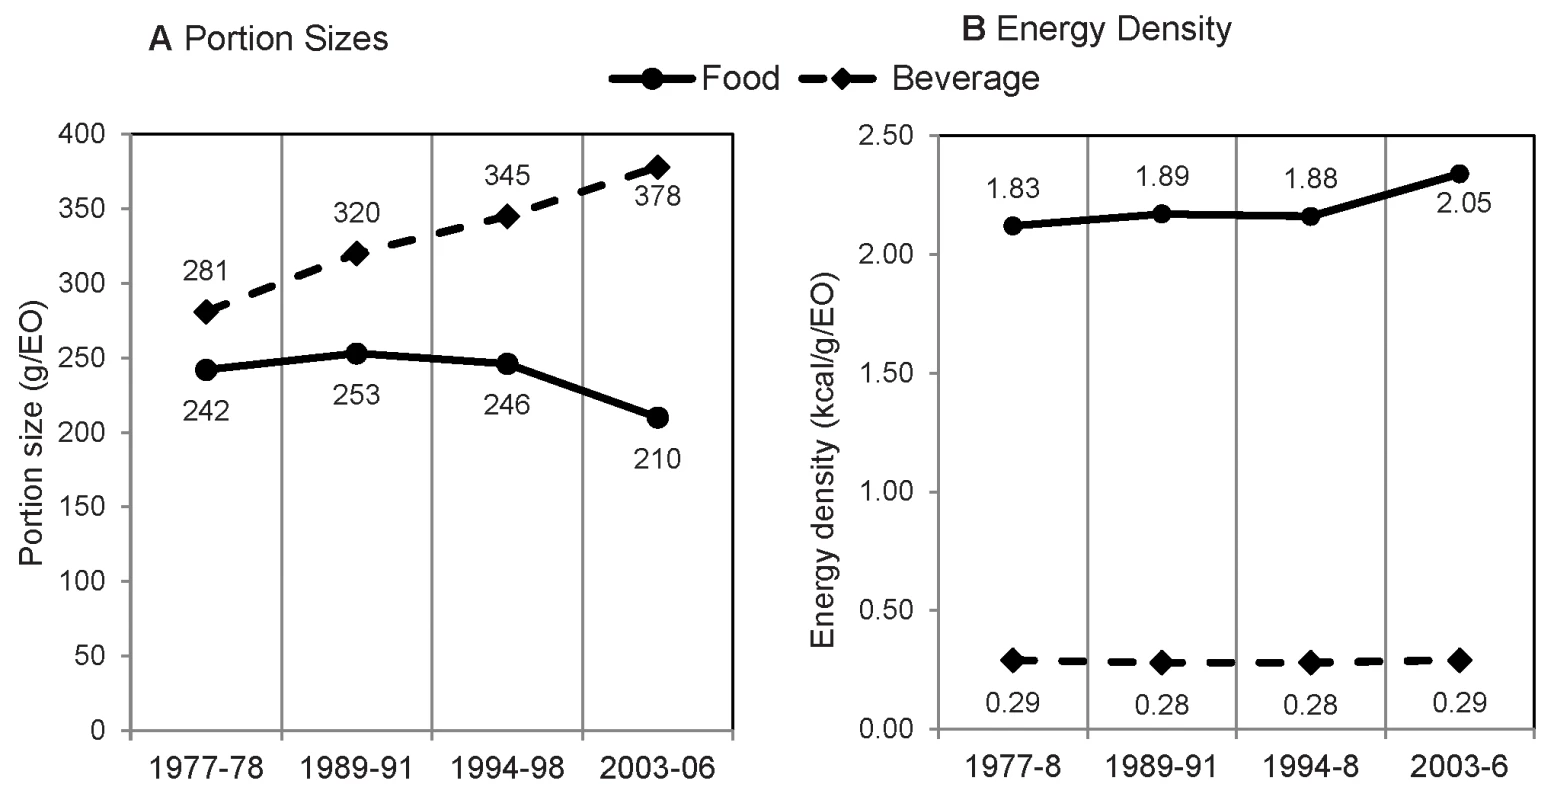 Average portion size and energy density per eating occasion, by food and beverage.